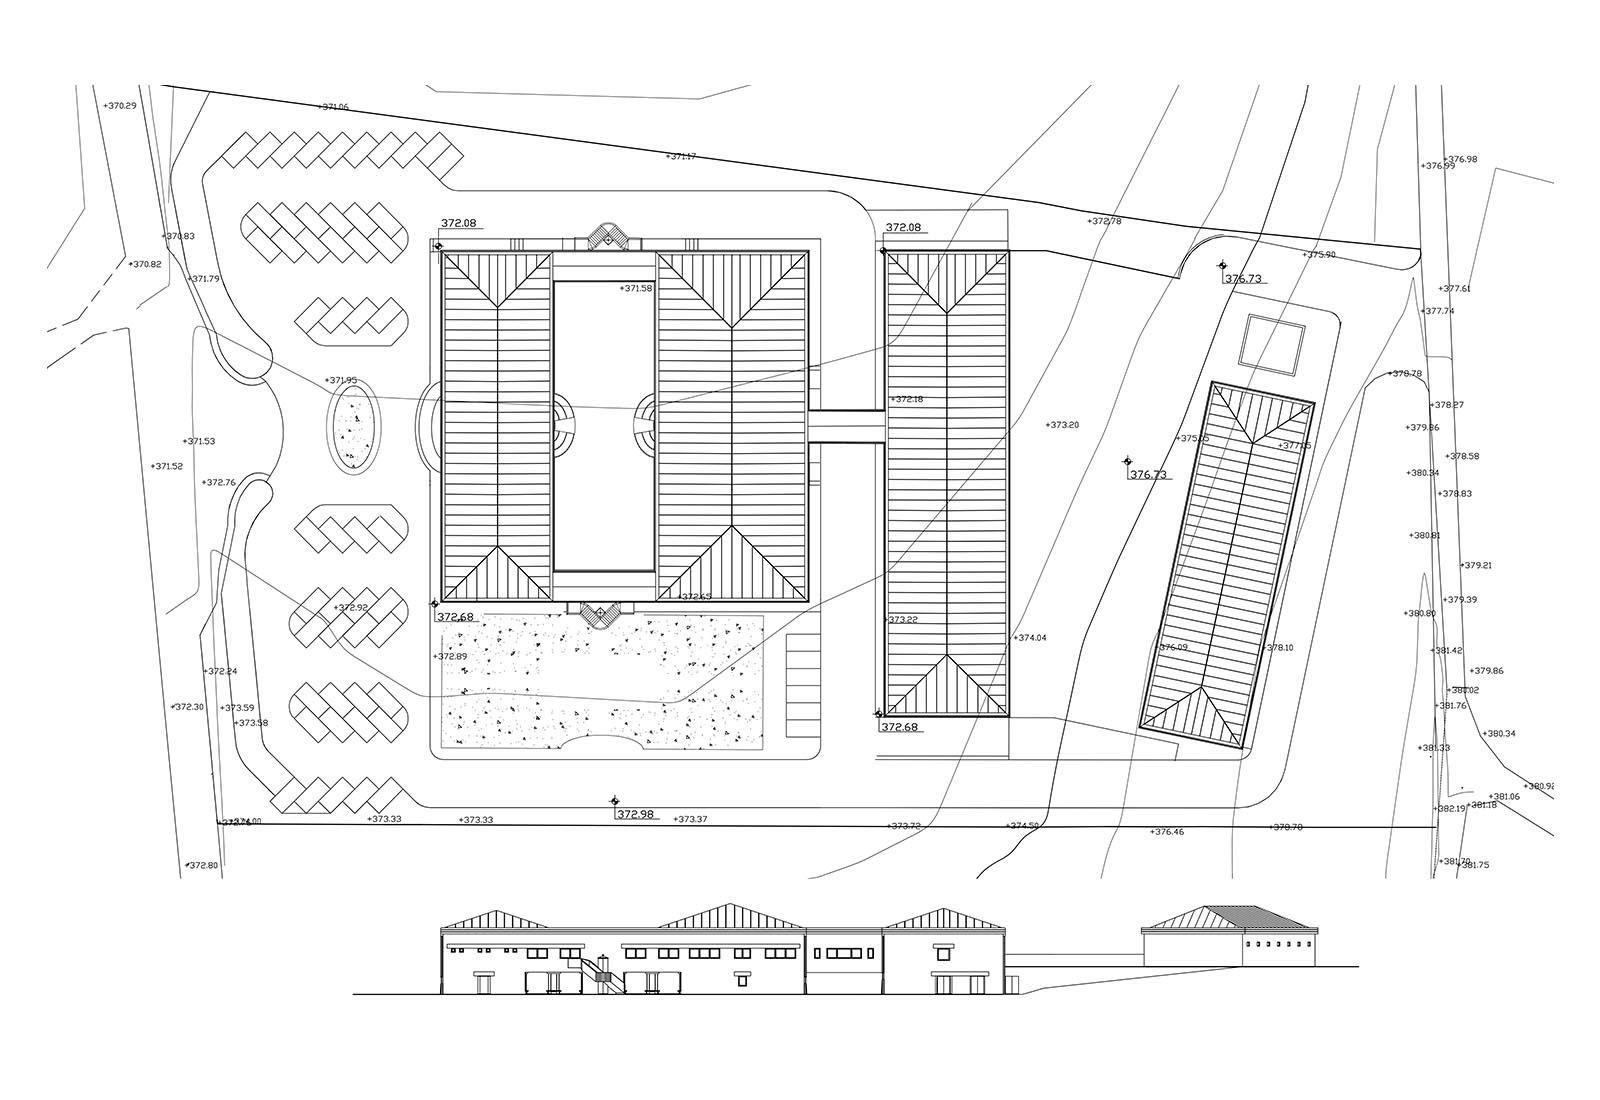 Faculty of Veterinary in Matelica - General project plan